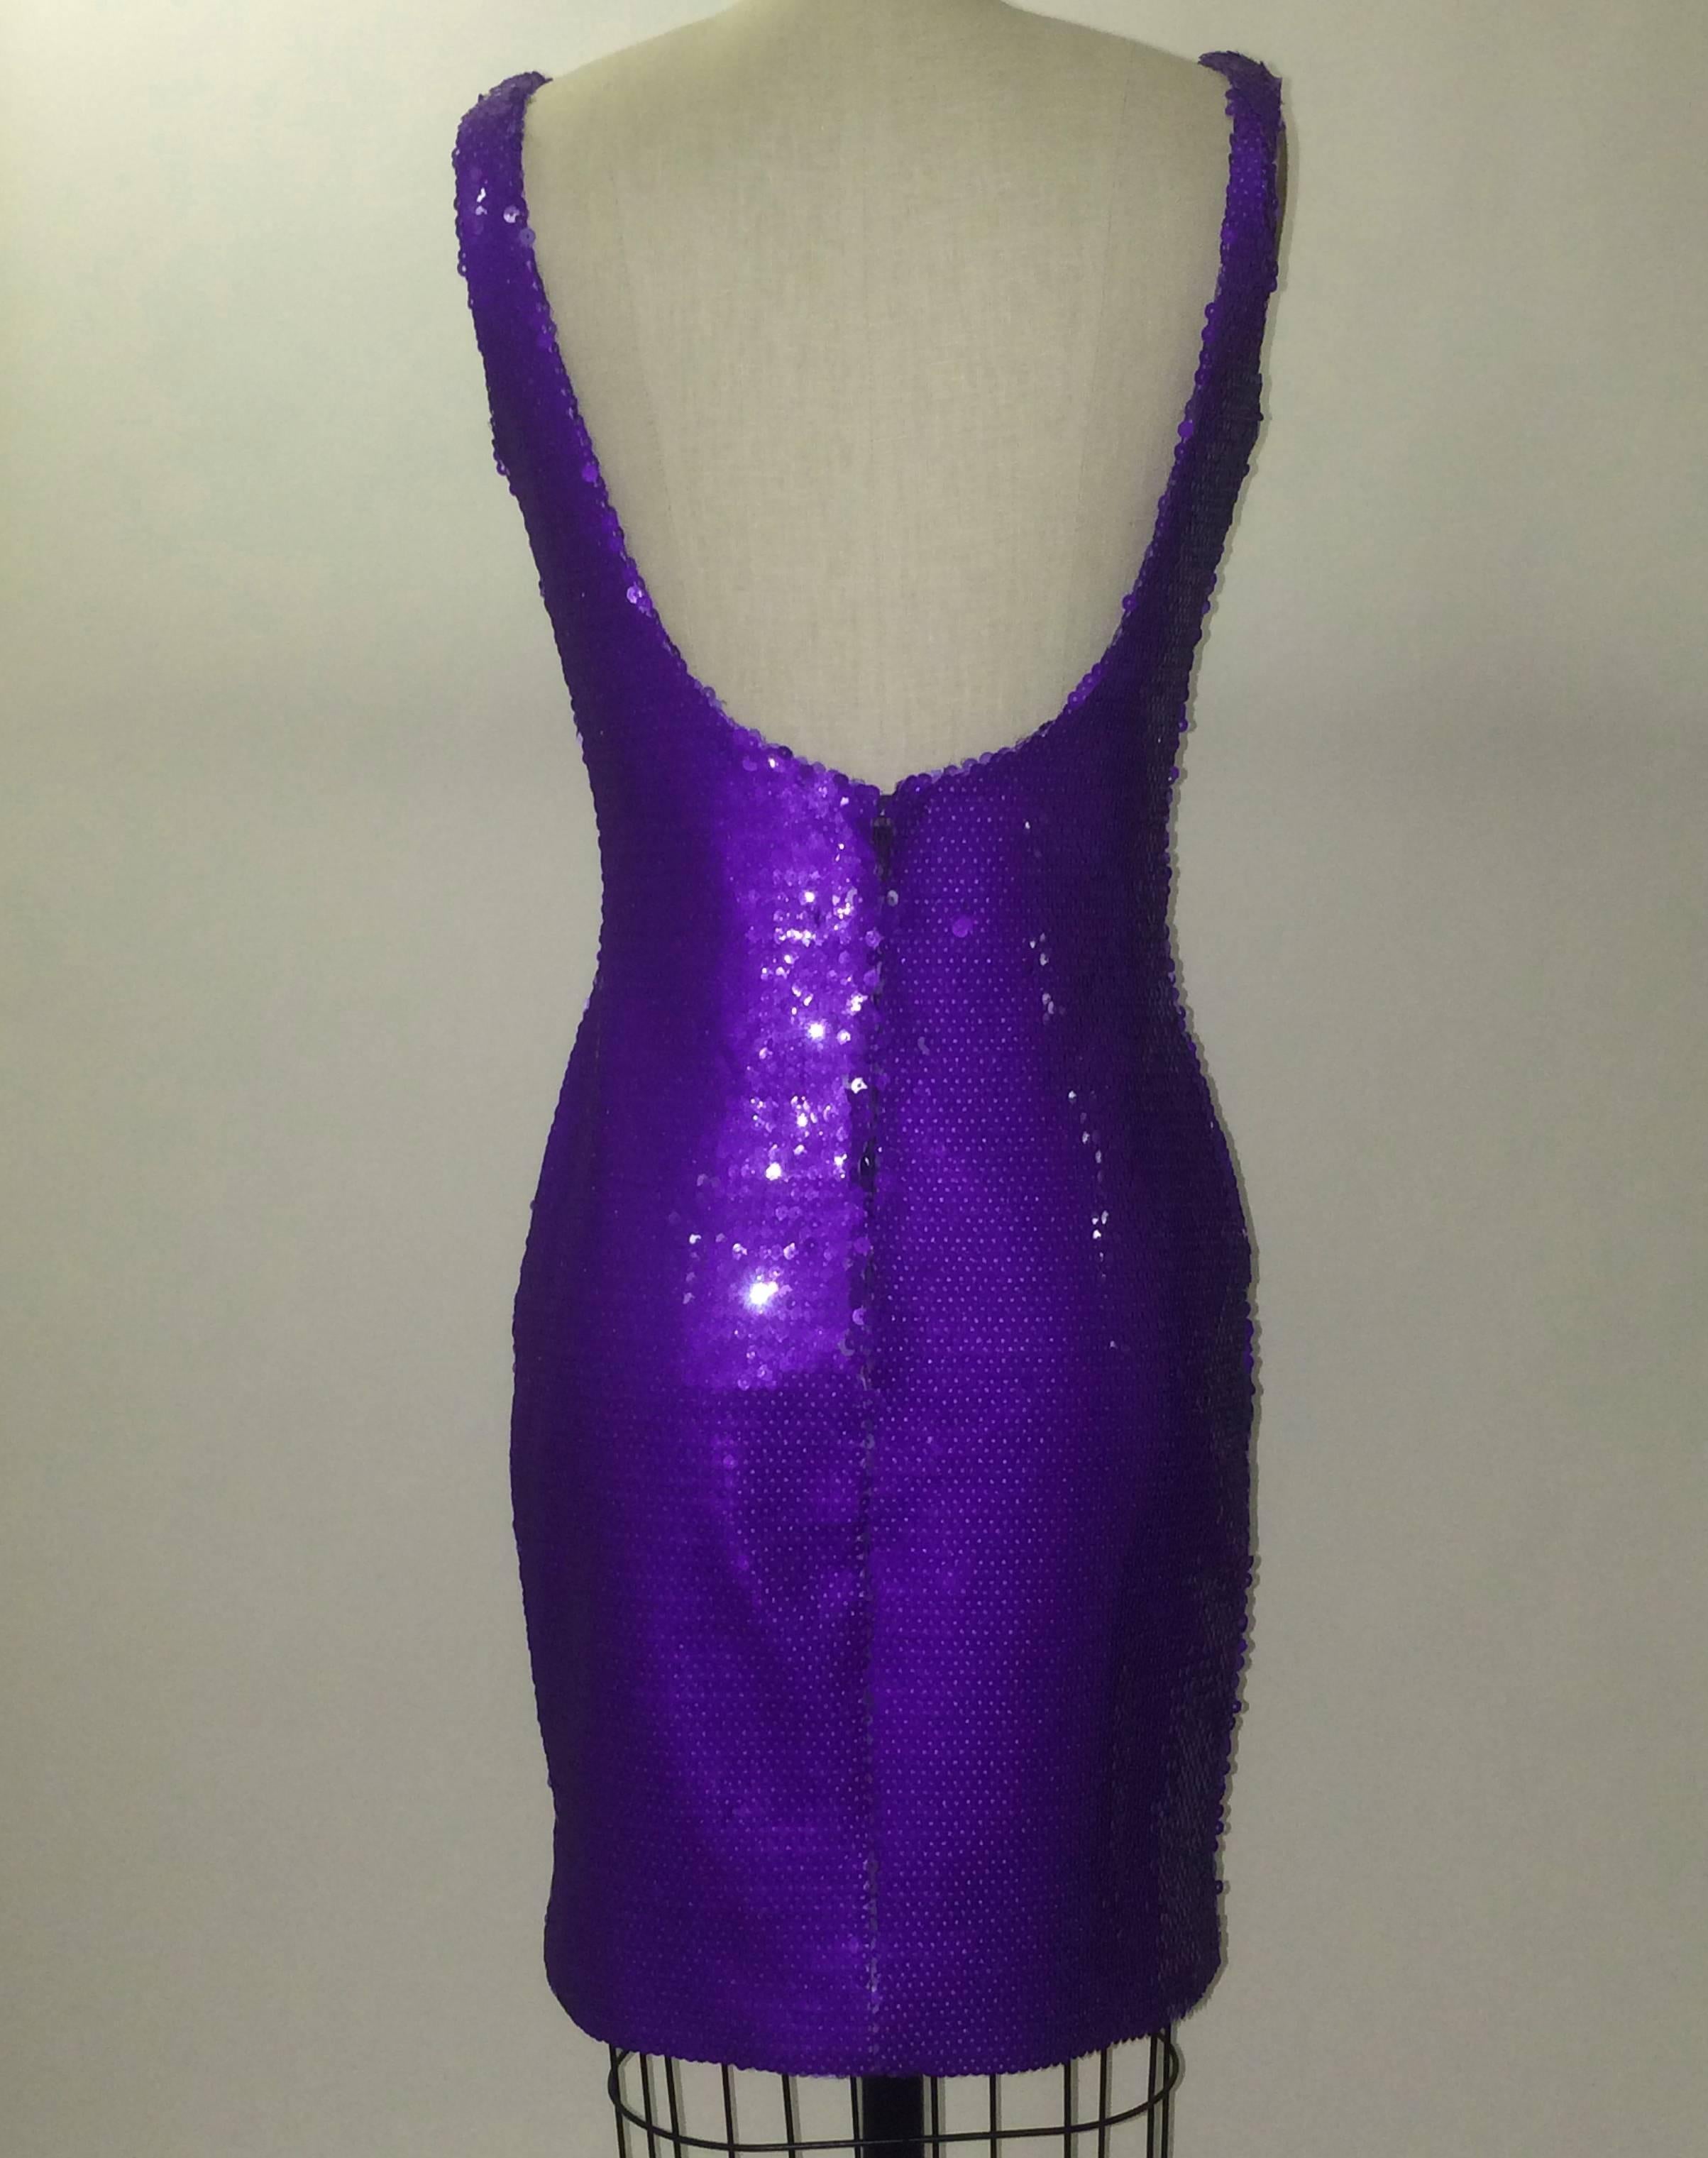 Stephen Sprouse vintage 1980's purple sequin covered scoop back sleeveless dress. Zip and hook and eye at back.

84% polyester, 16% lycra.

Made in USA of imported fabric. 

Labelled size 6, runs small (fits more like modern 4, see